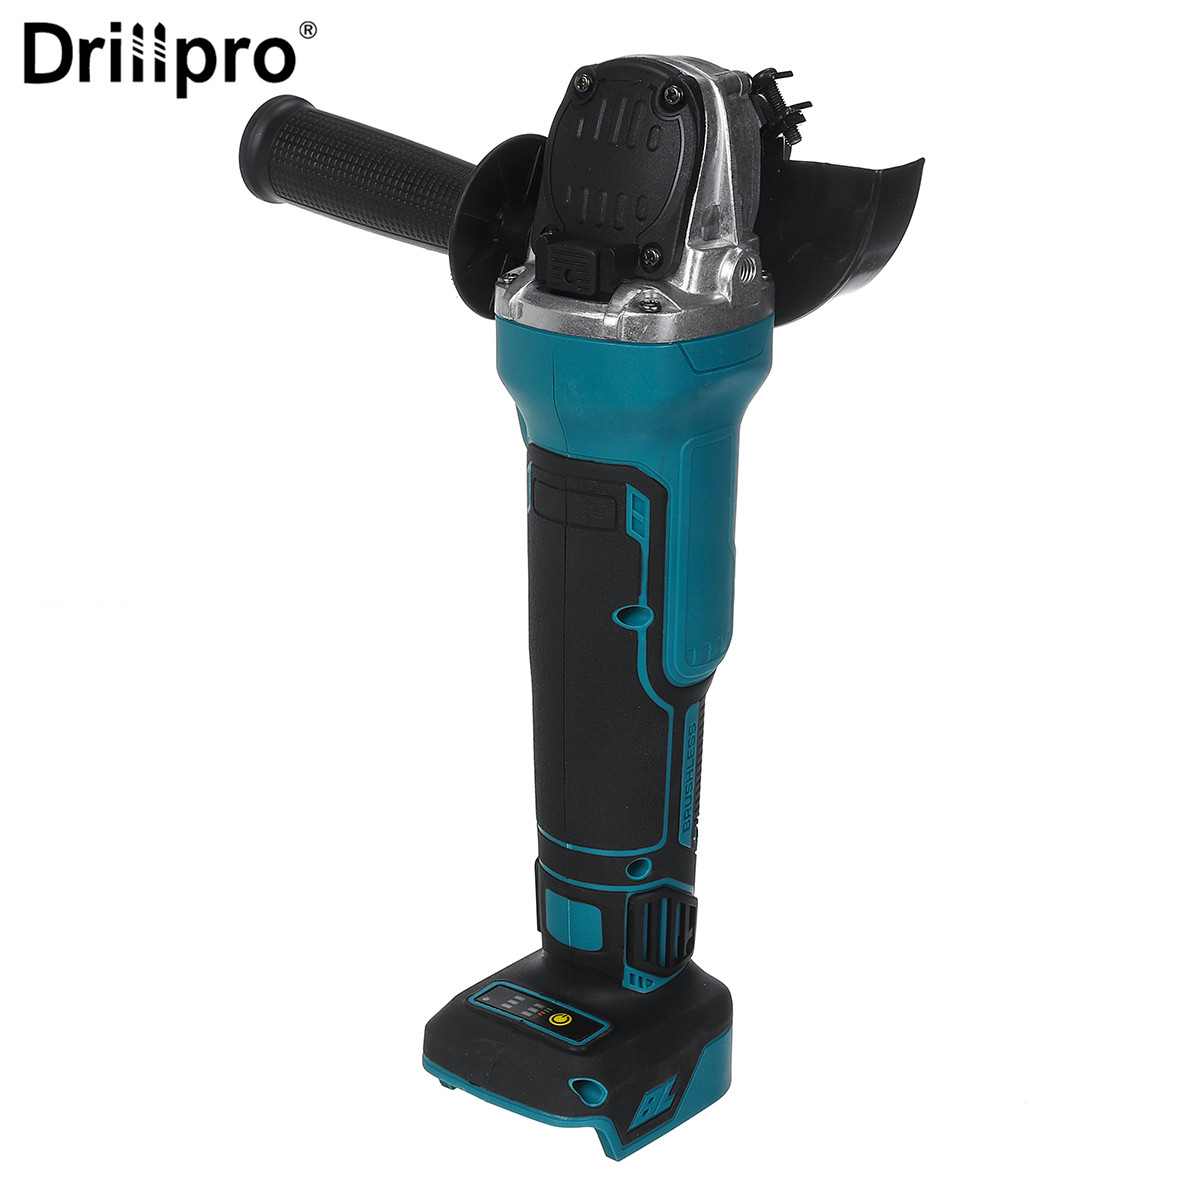 Drillpro-388VF-100mm125mm-Brushless-Angle-Grinder-Rechargeable-Electric-Cutting-Grinding-Tool-W-12-B-1861855-6